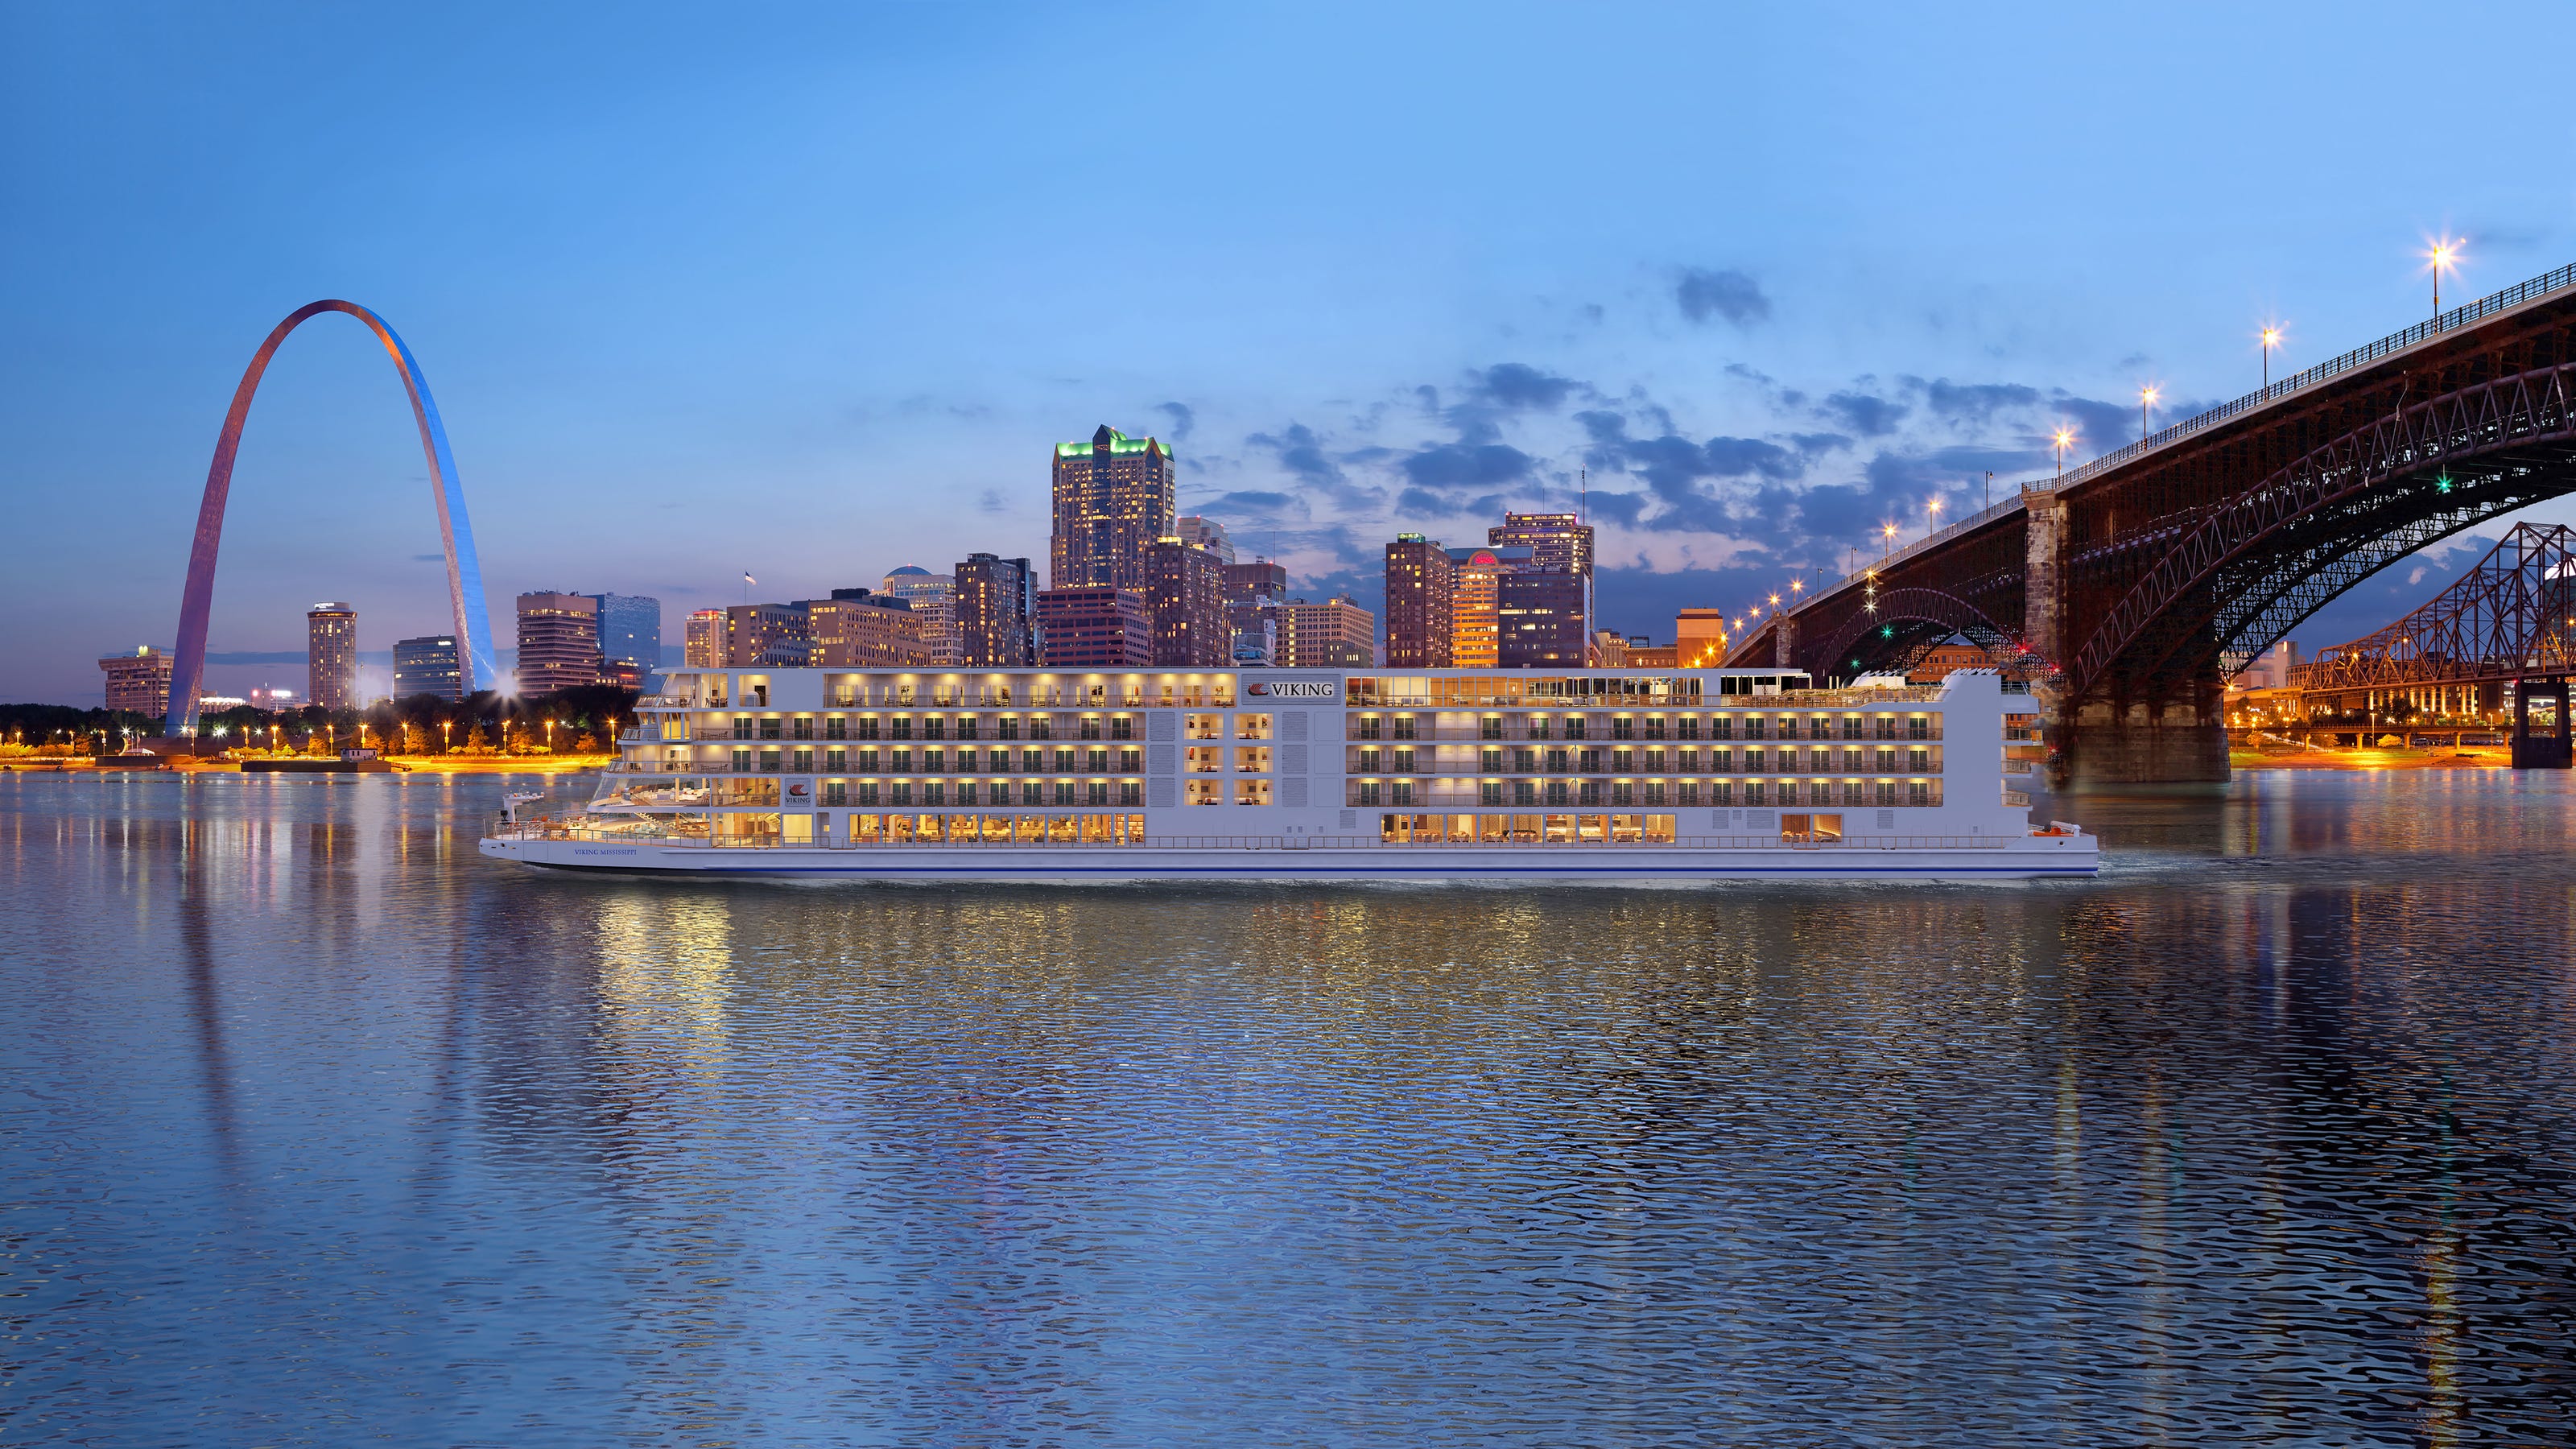 What to expect from Viking's new Mississippi River ship